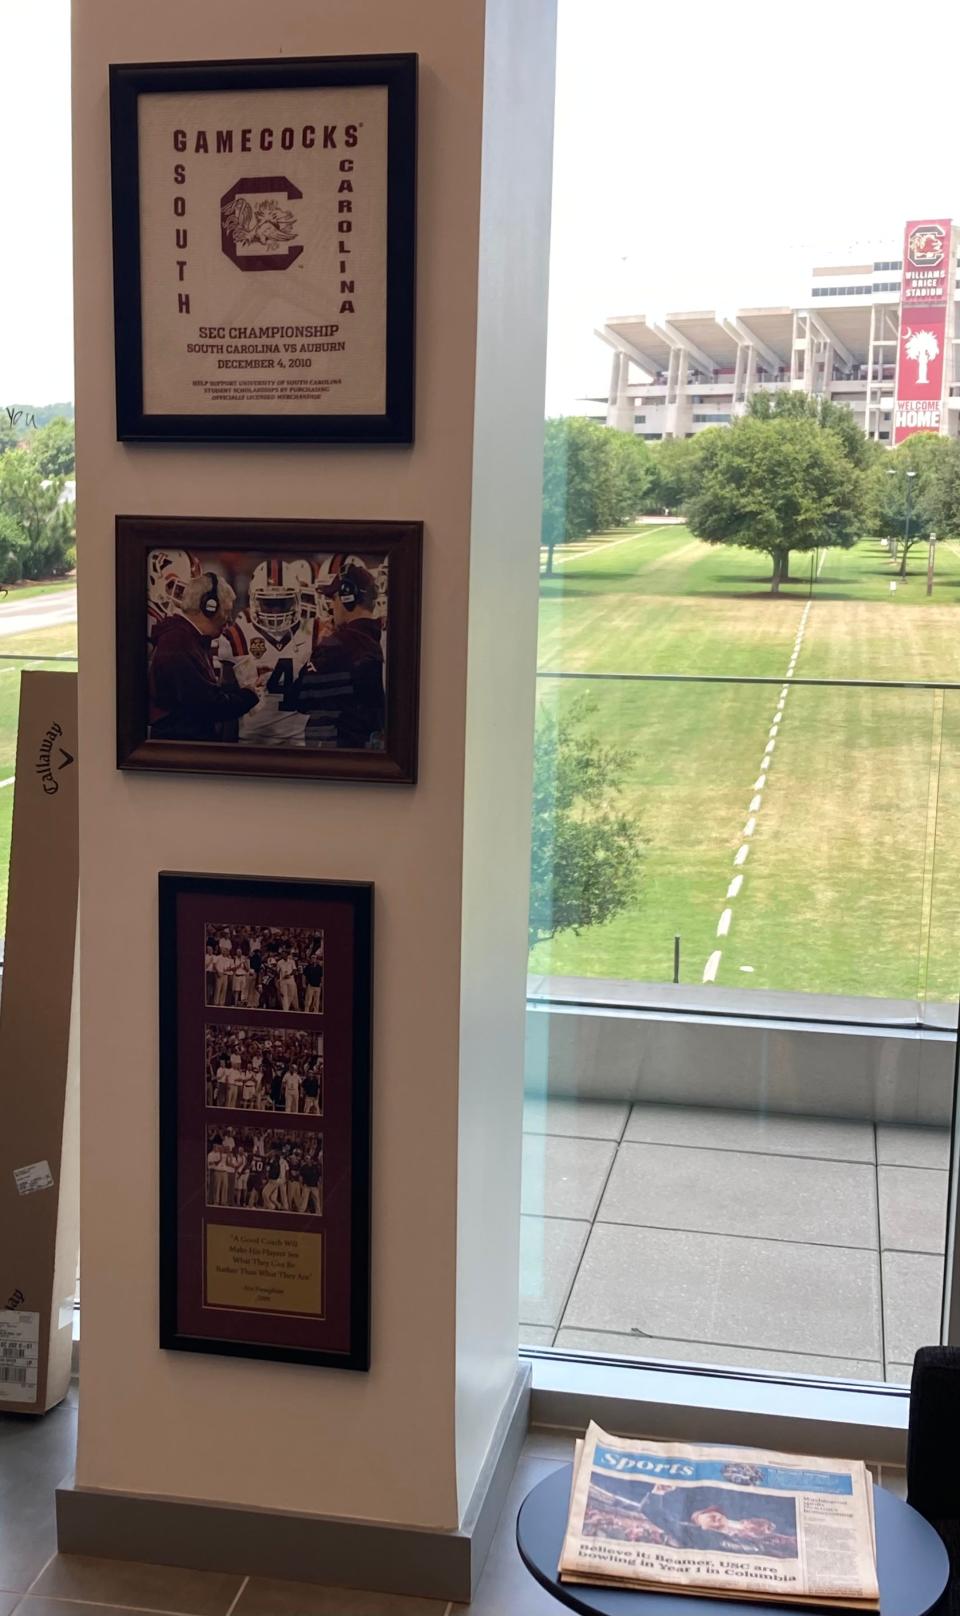 A photo in Shane Beamer's South Carolina office shows him coaching at Virginia Tech with his dad, Frank Beamer, during the 2011 ACC Championship Game. Between them in the photo is Hokies running back David Wilson. Above that photo is a white towel from South Carolina's 2010 appearance in the SEC Championship. Shane Beamer was an assistant on Steve Spurrier's staff that season.